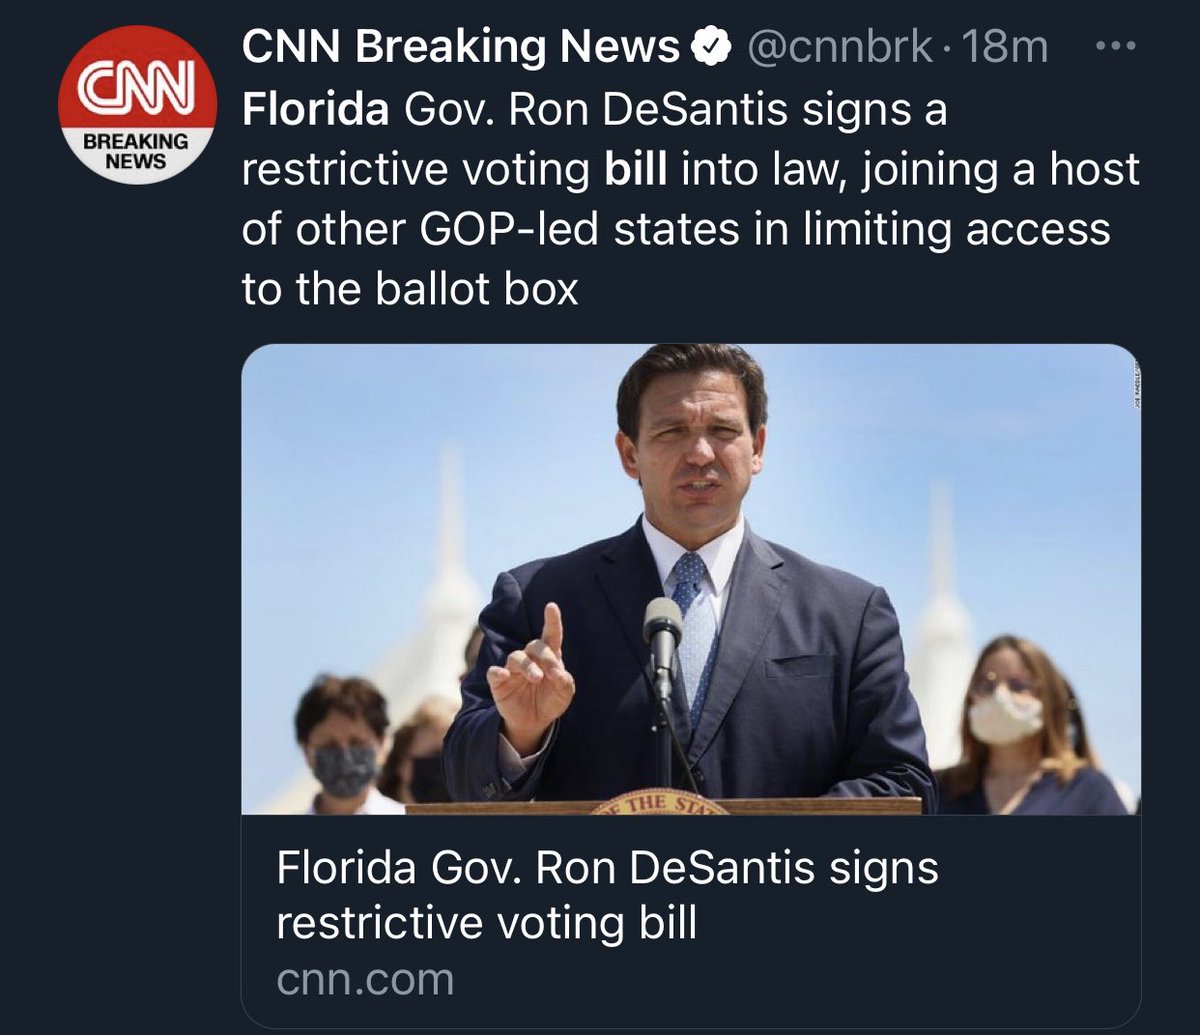 Here we go again. Before you write a story about the Florida law’s “sweeping restrictions” or “reducing voter access” please take a look at the specifics of the bill. Democrats want to make basic safeguards that have existed for decades toxic. Don’t help them gaslight.